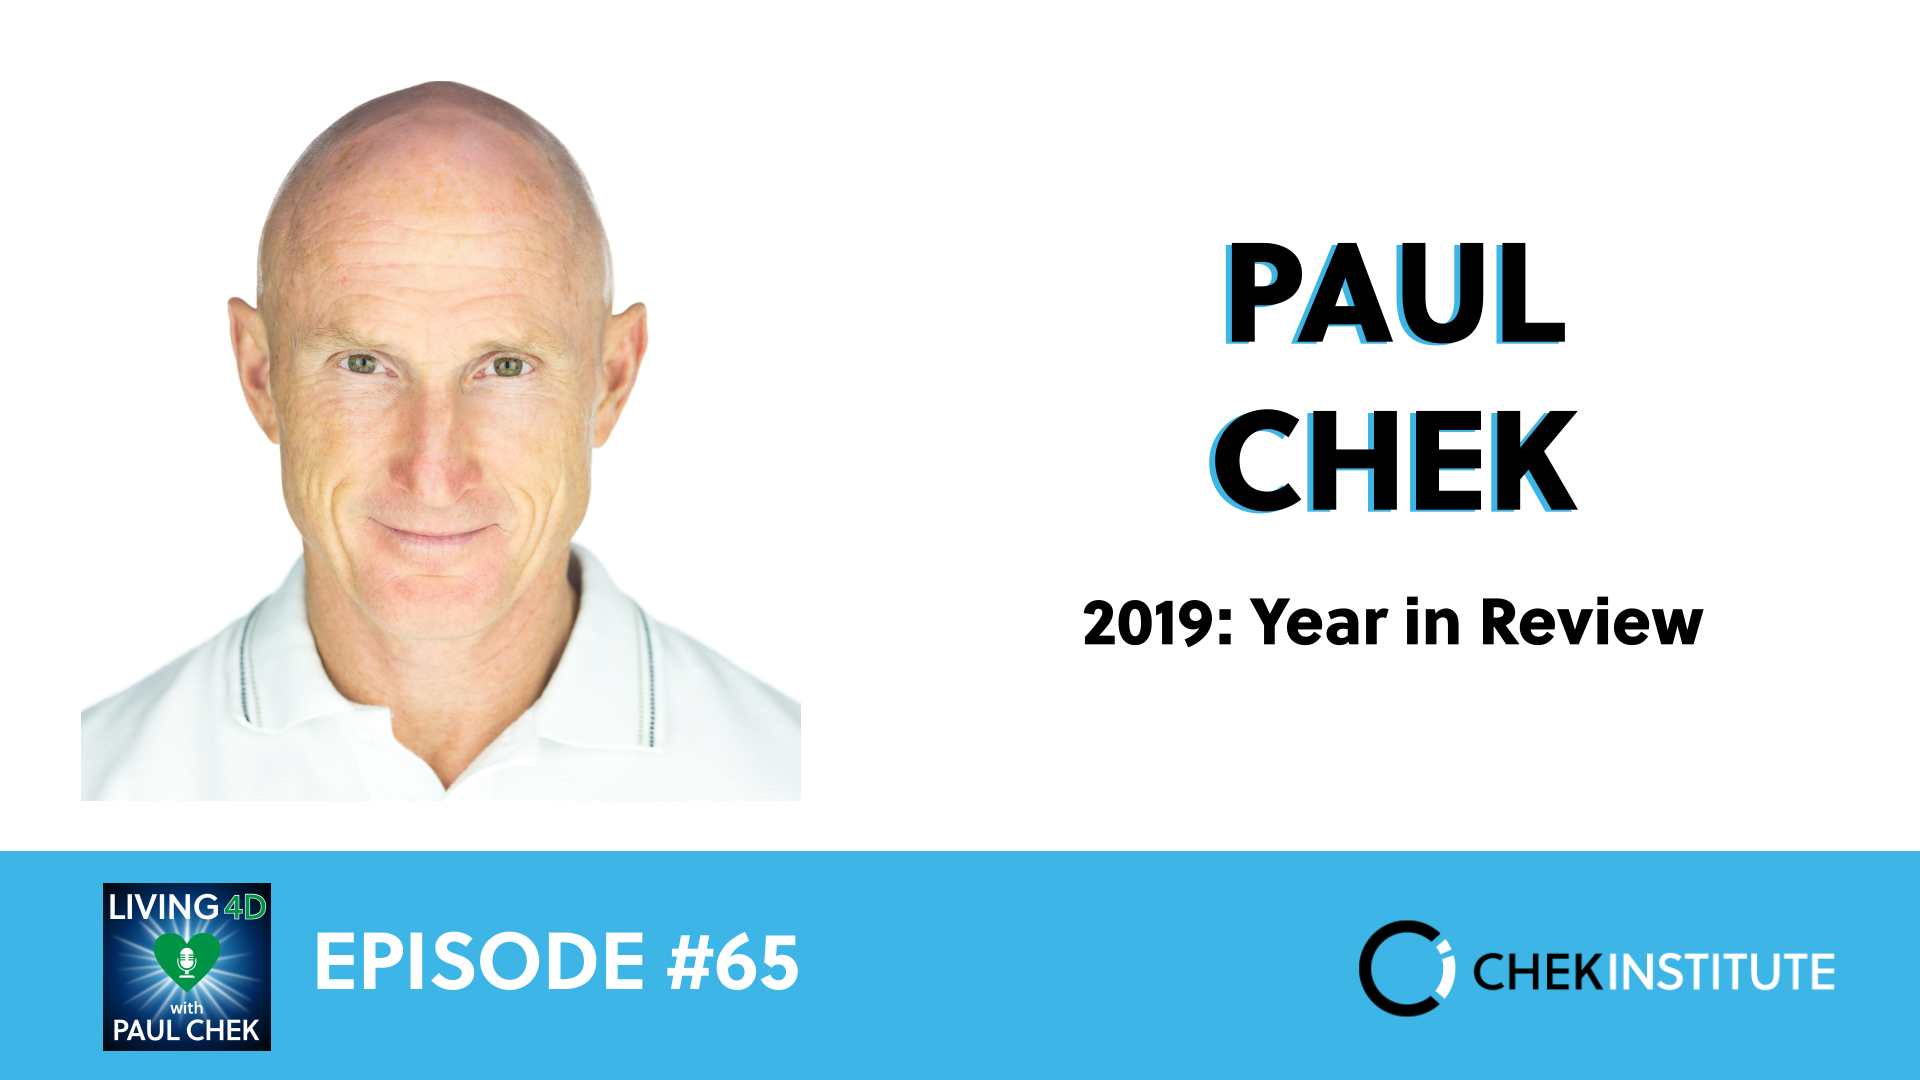 EP 65 - Paul Chek: 2020 - How to Make it Your Best Year Ever!